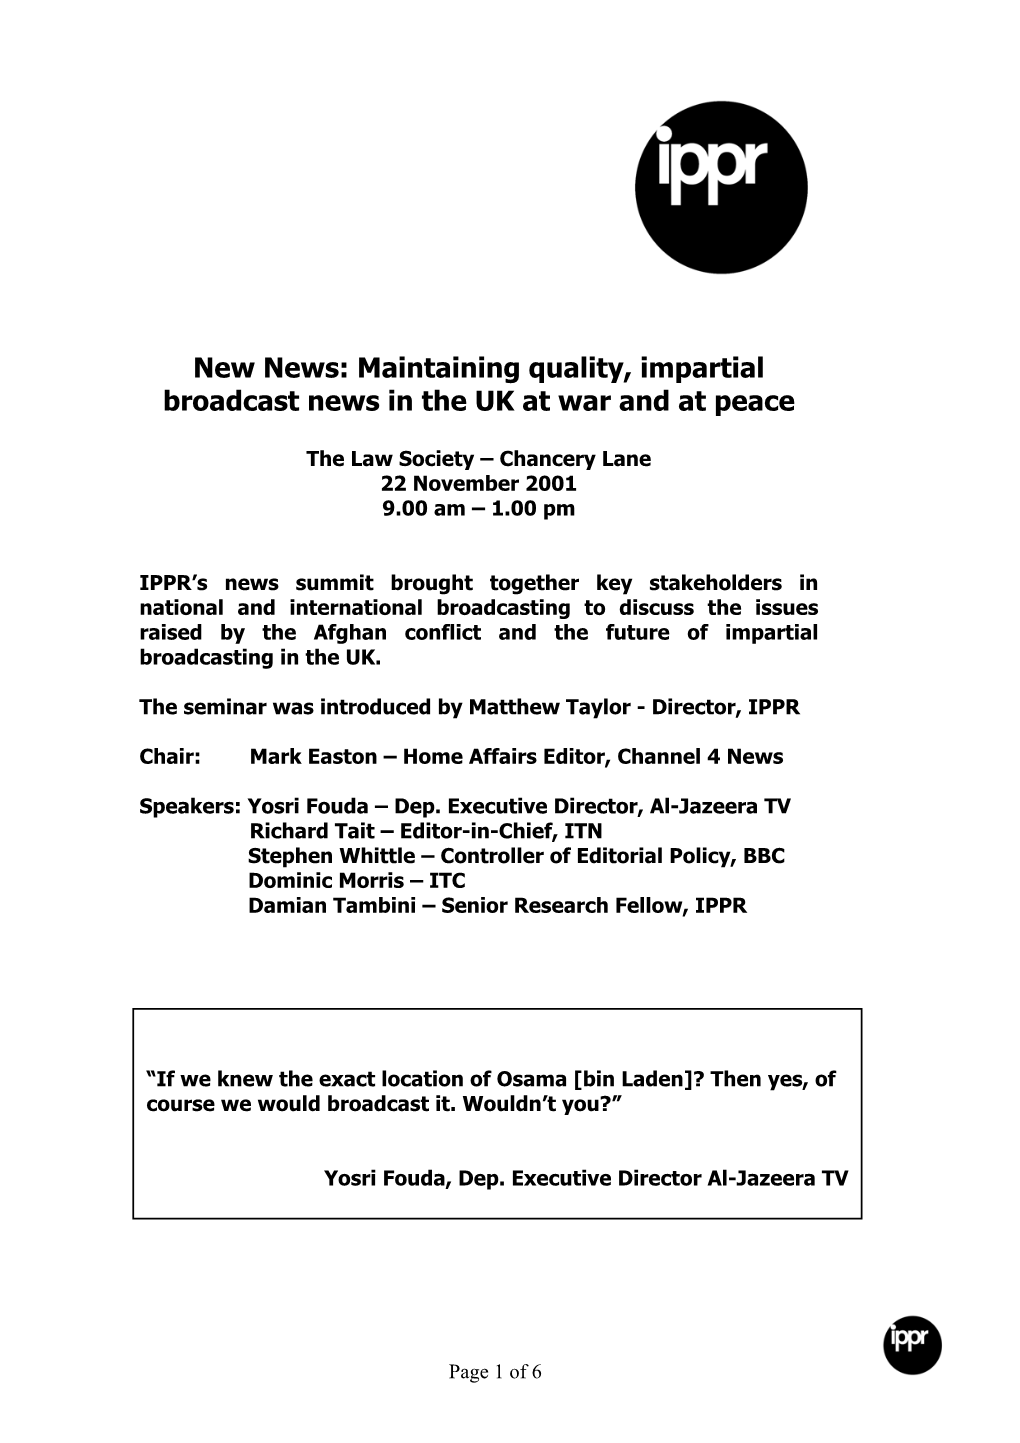 New News: Maintaining Quality, Impartial Broadcast News in the UK at War and at Peace